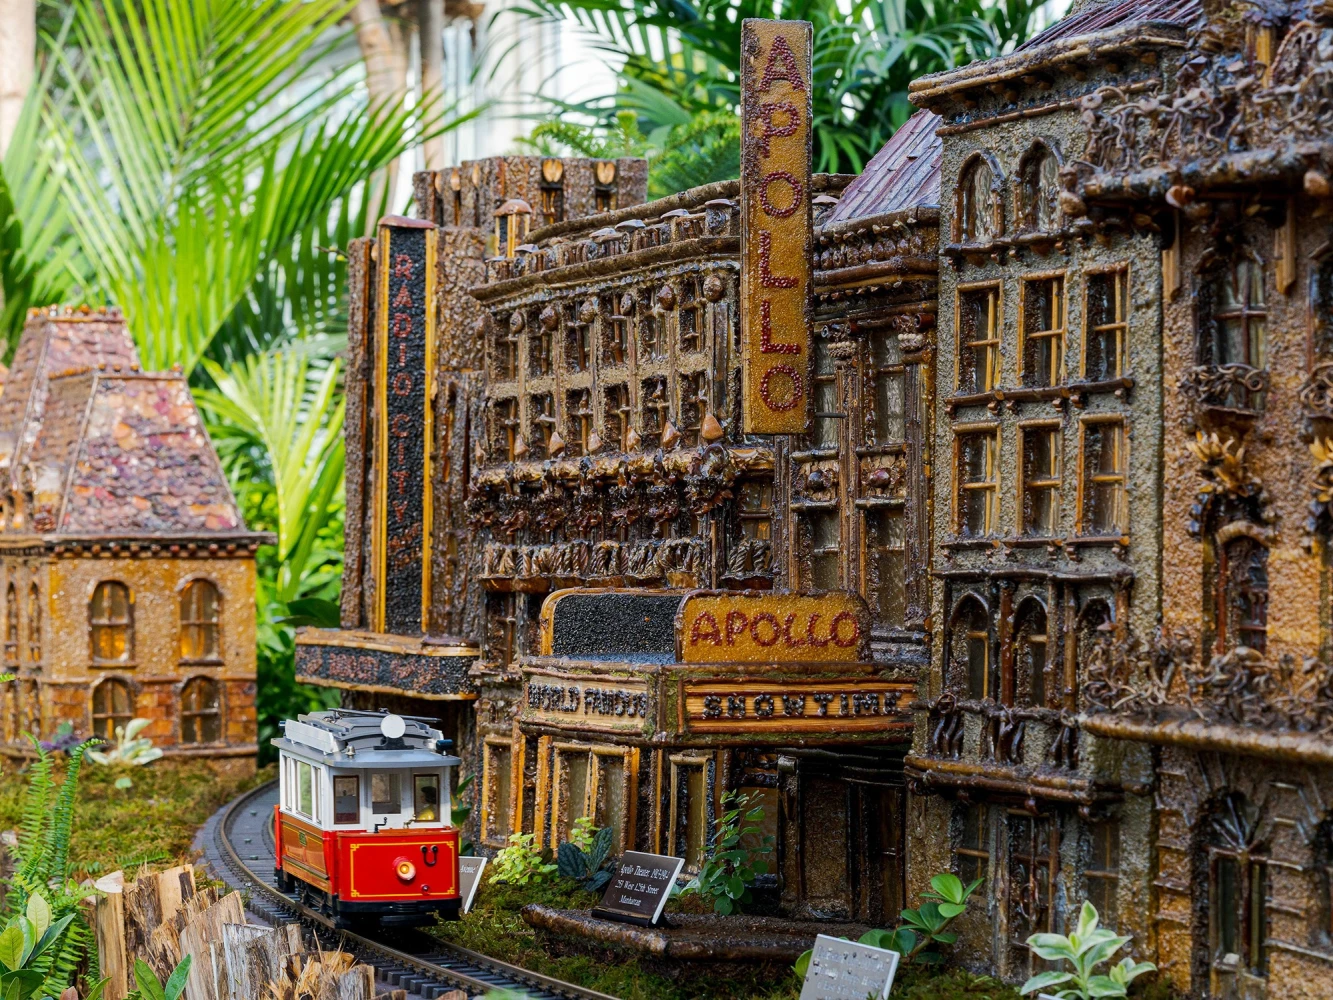 Holiday Train Show: What to expect - 6